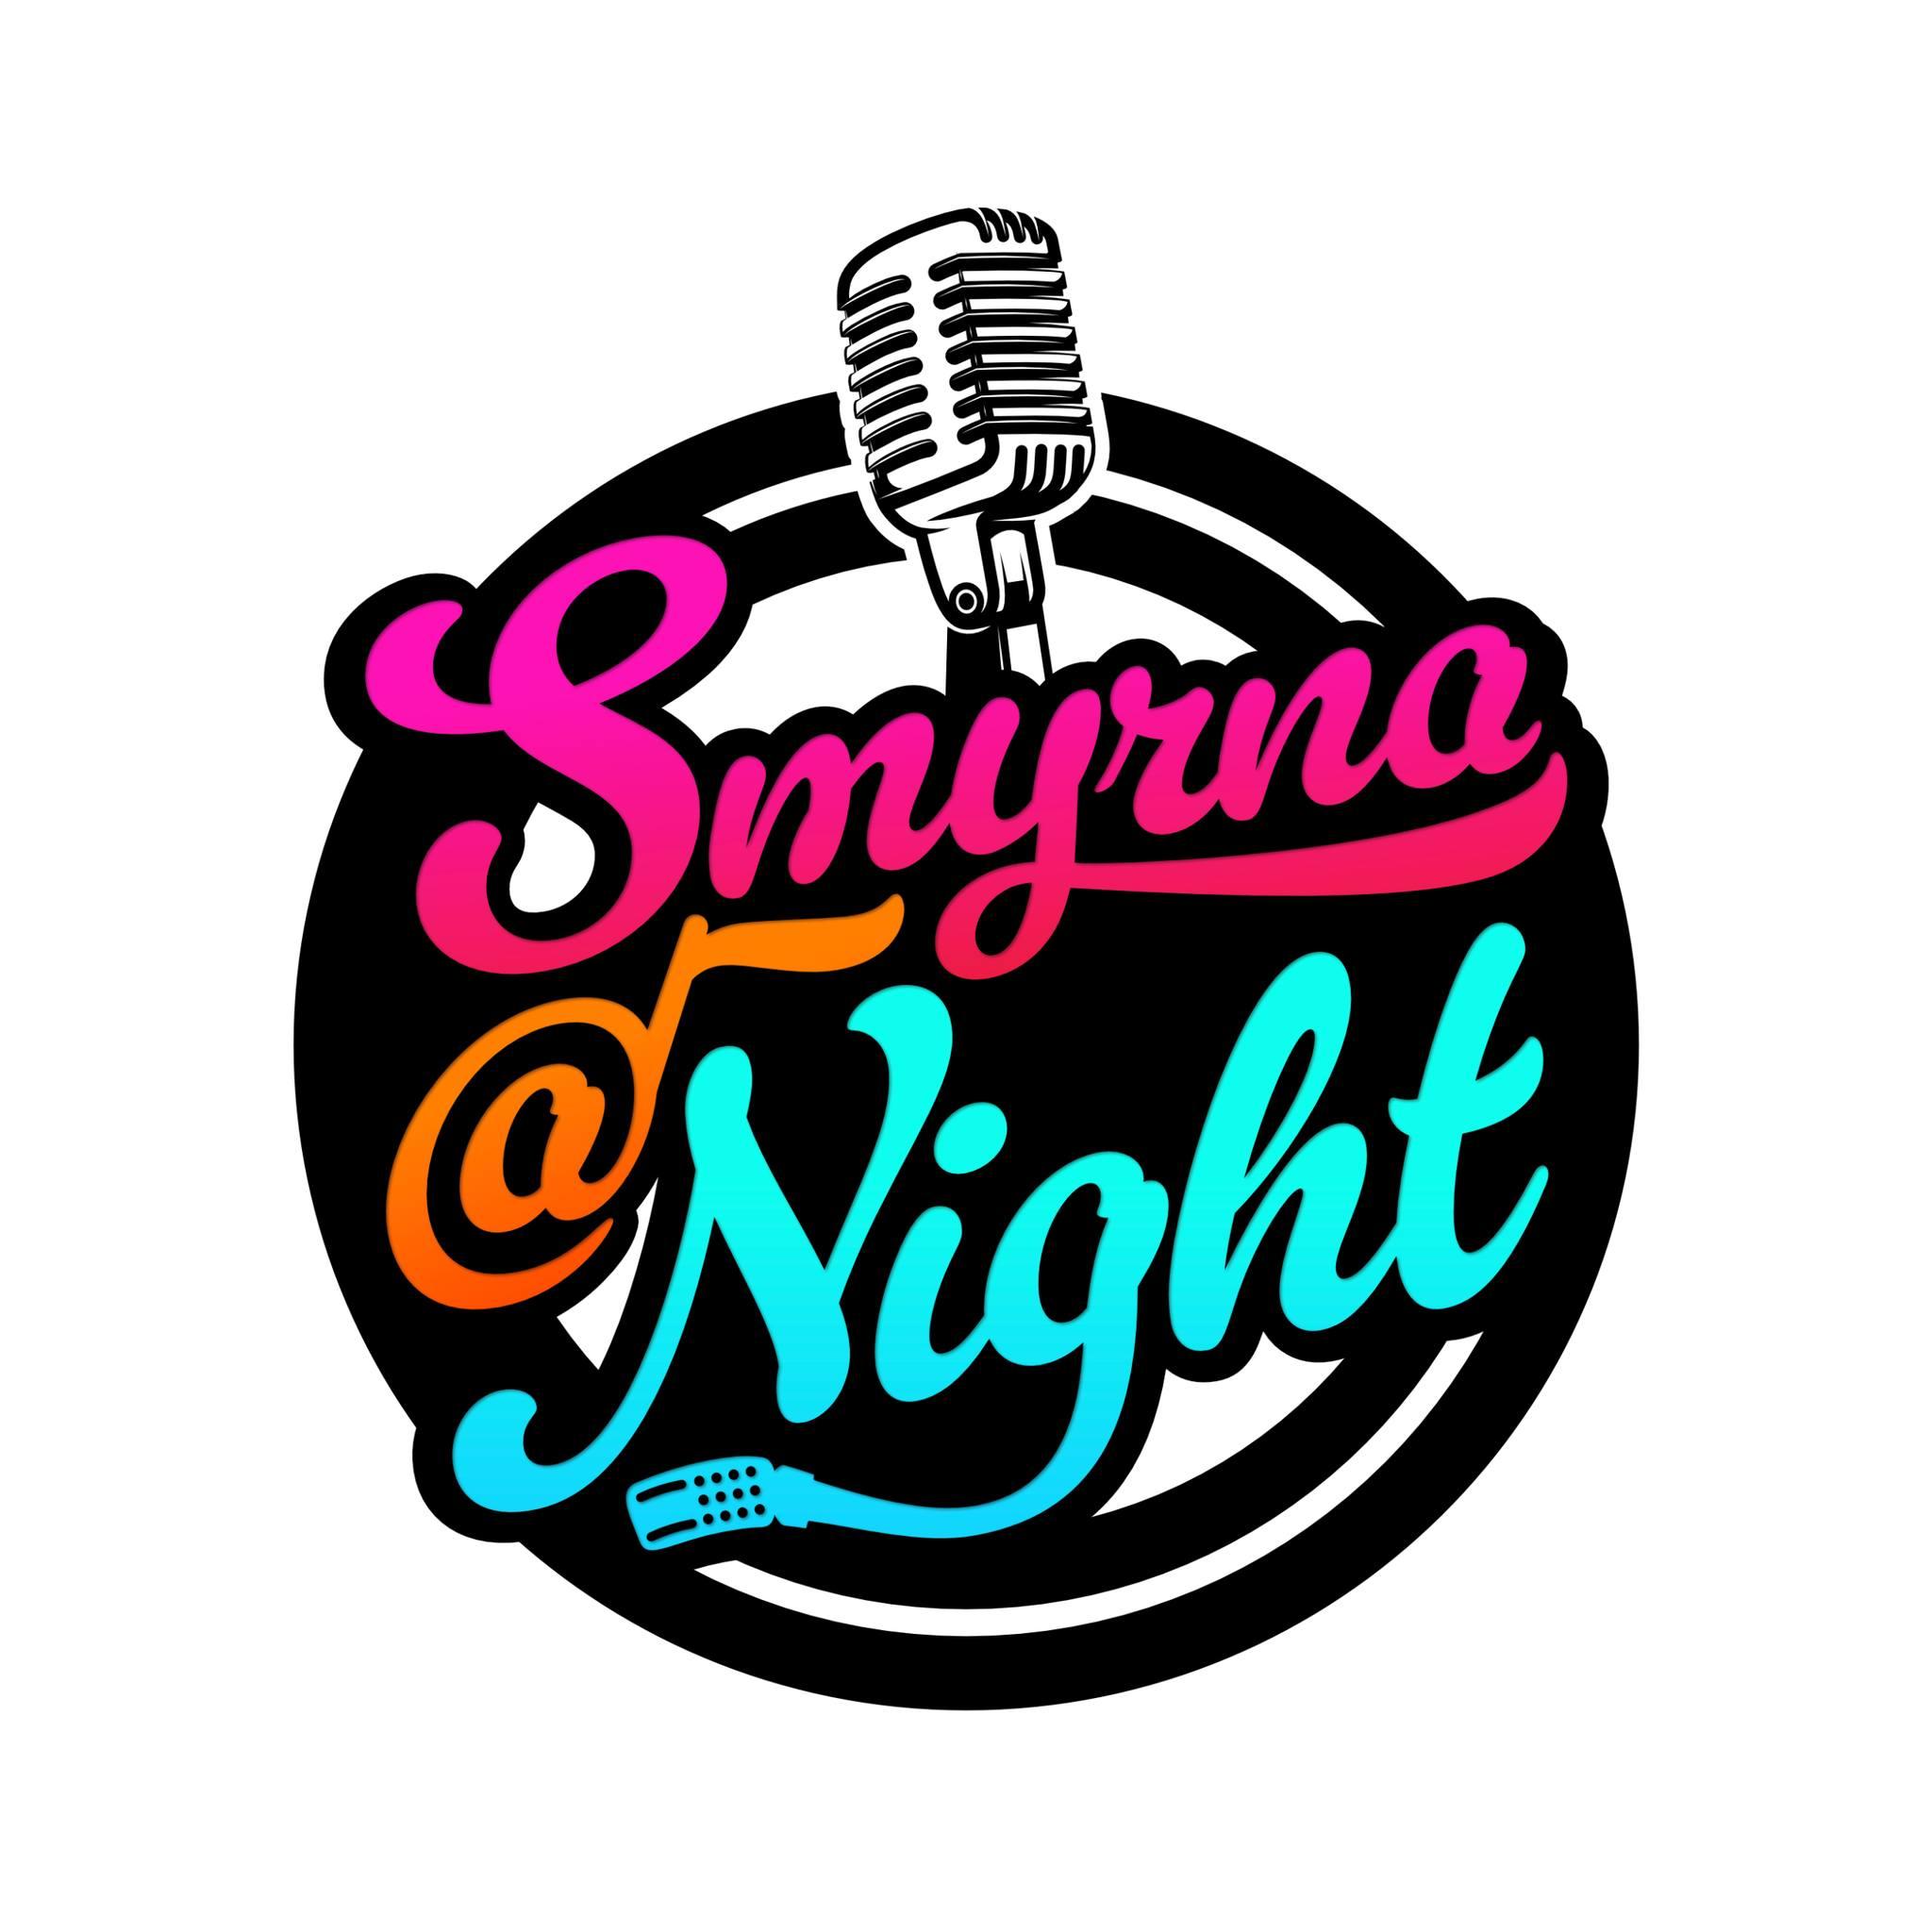 Smyrna at Night Festival Lineup, Dates and Location